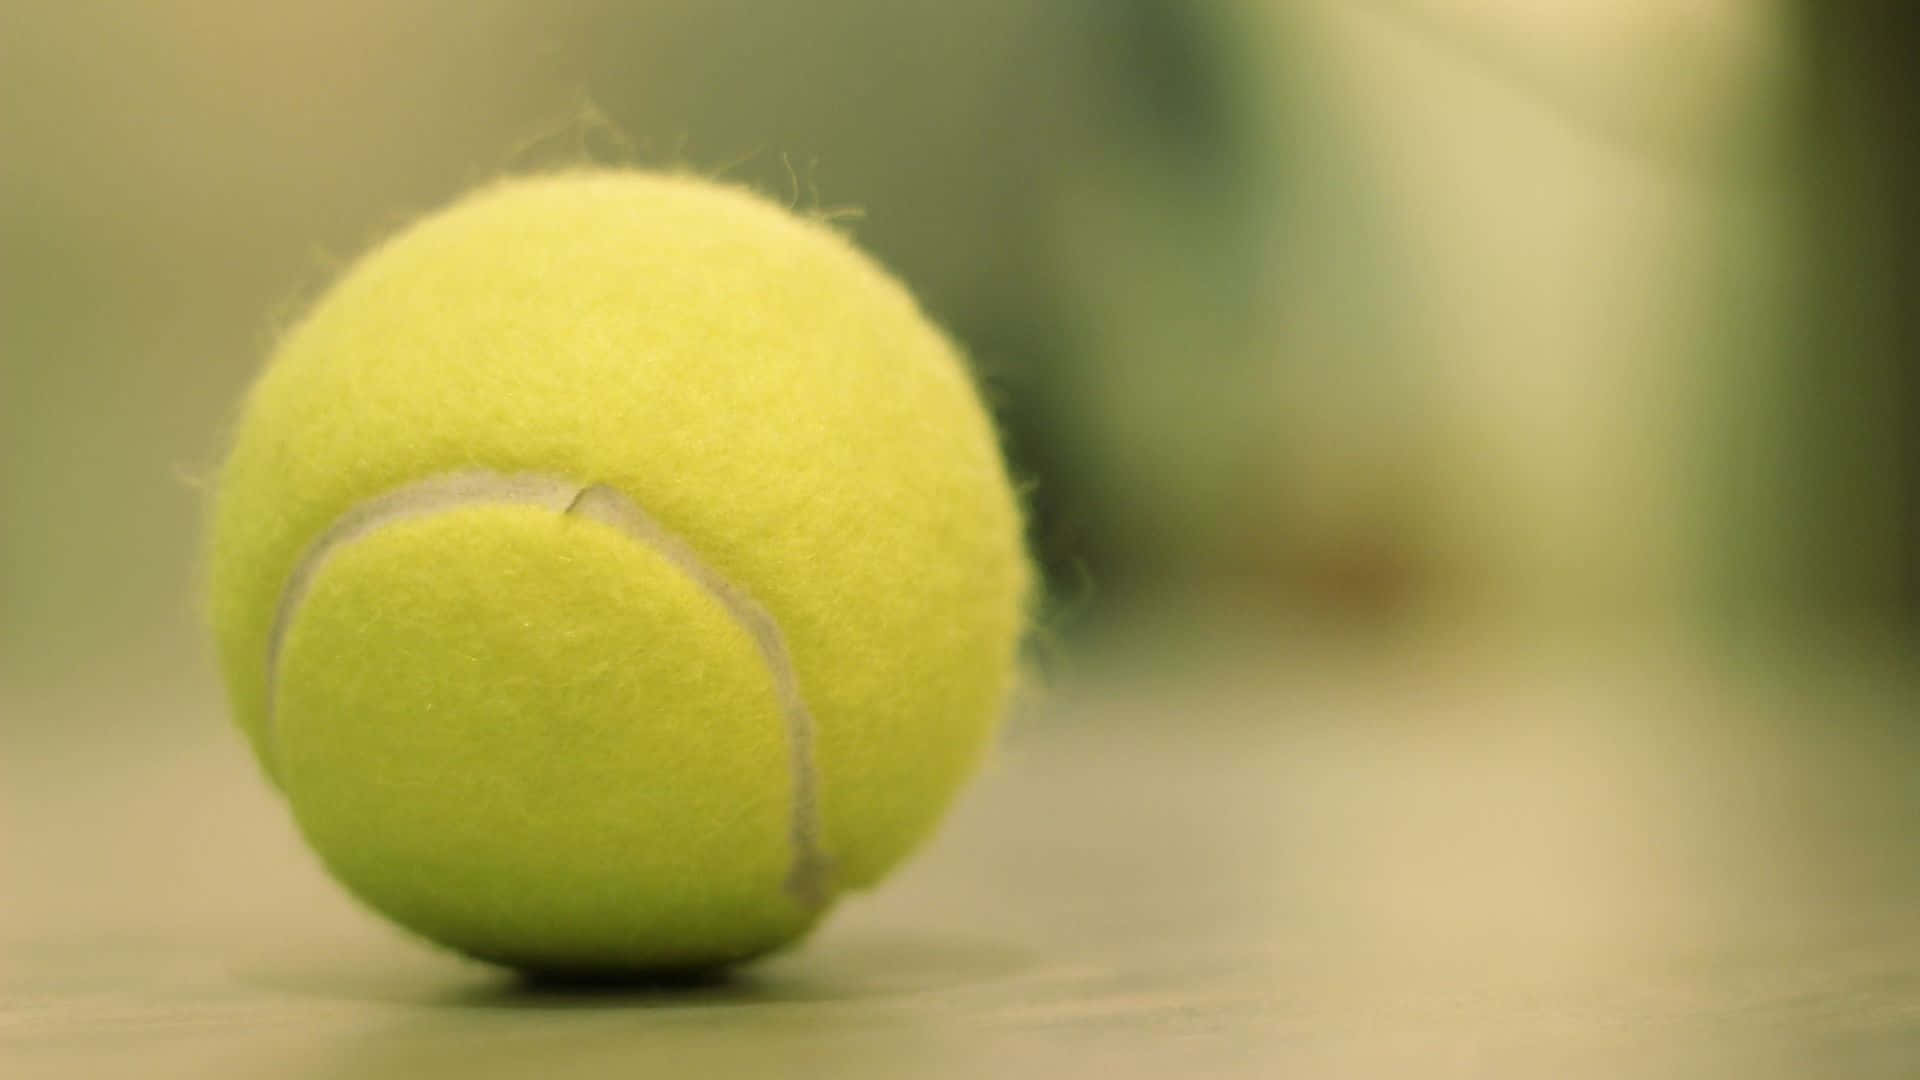 "A Perfectly Lined Up Serving of Tennis Balls" Wallpaper